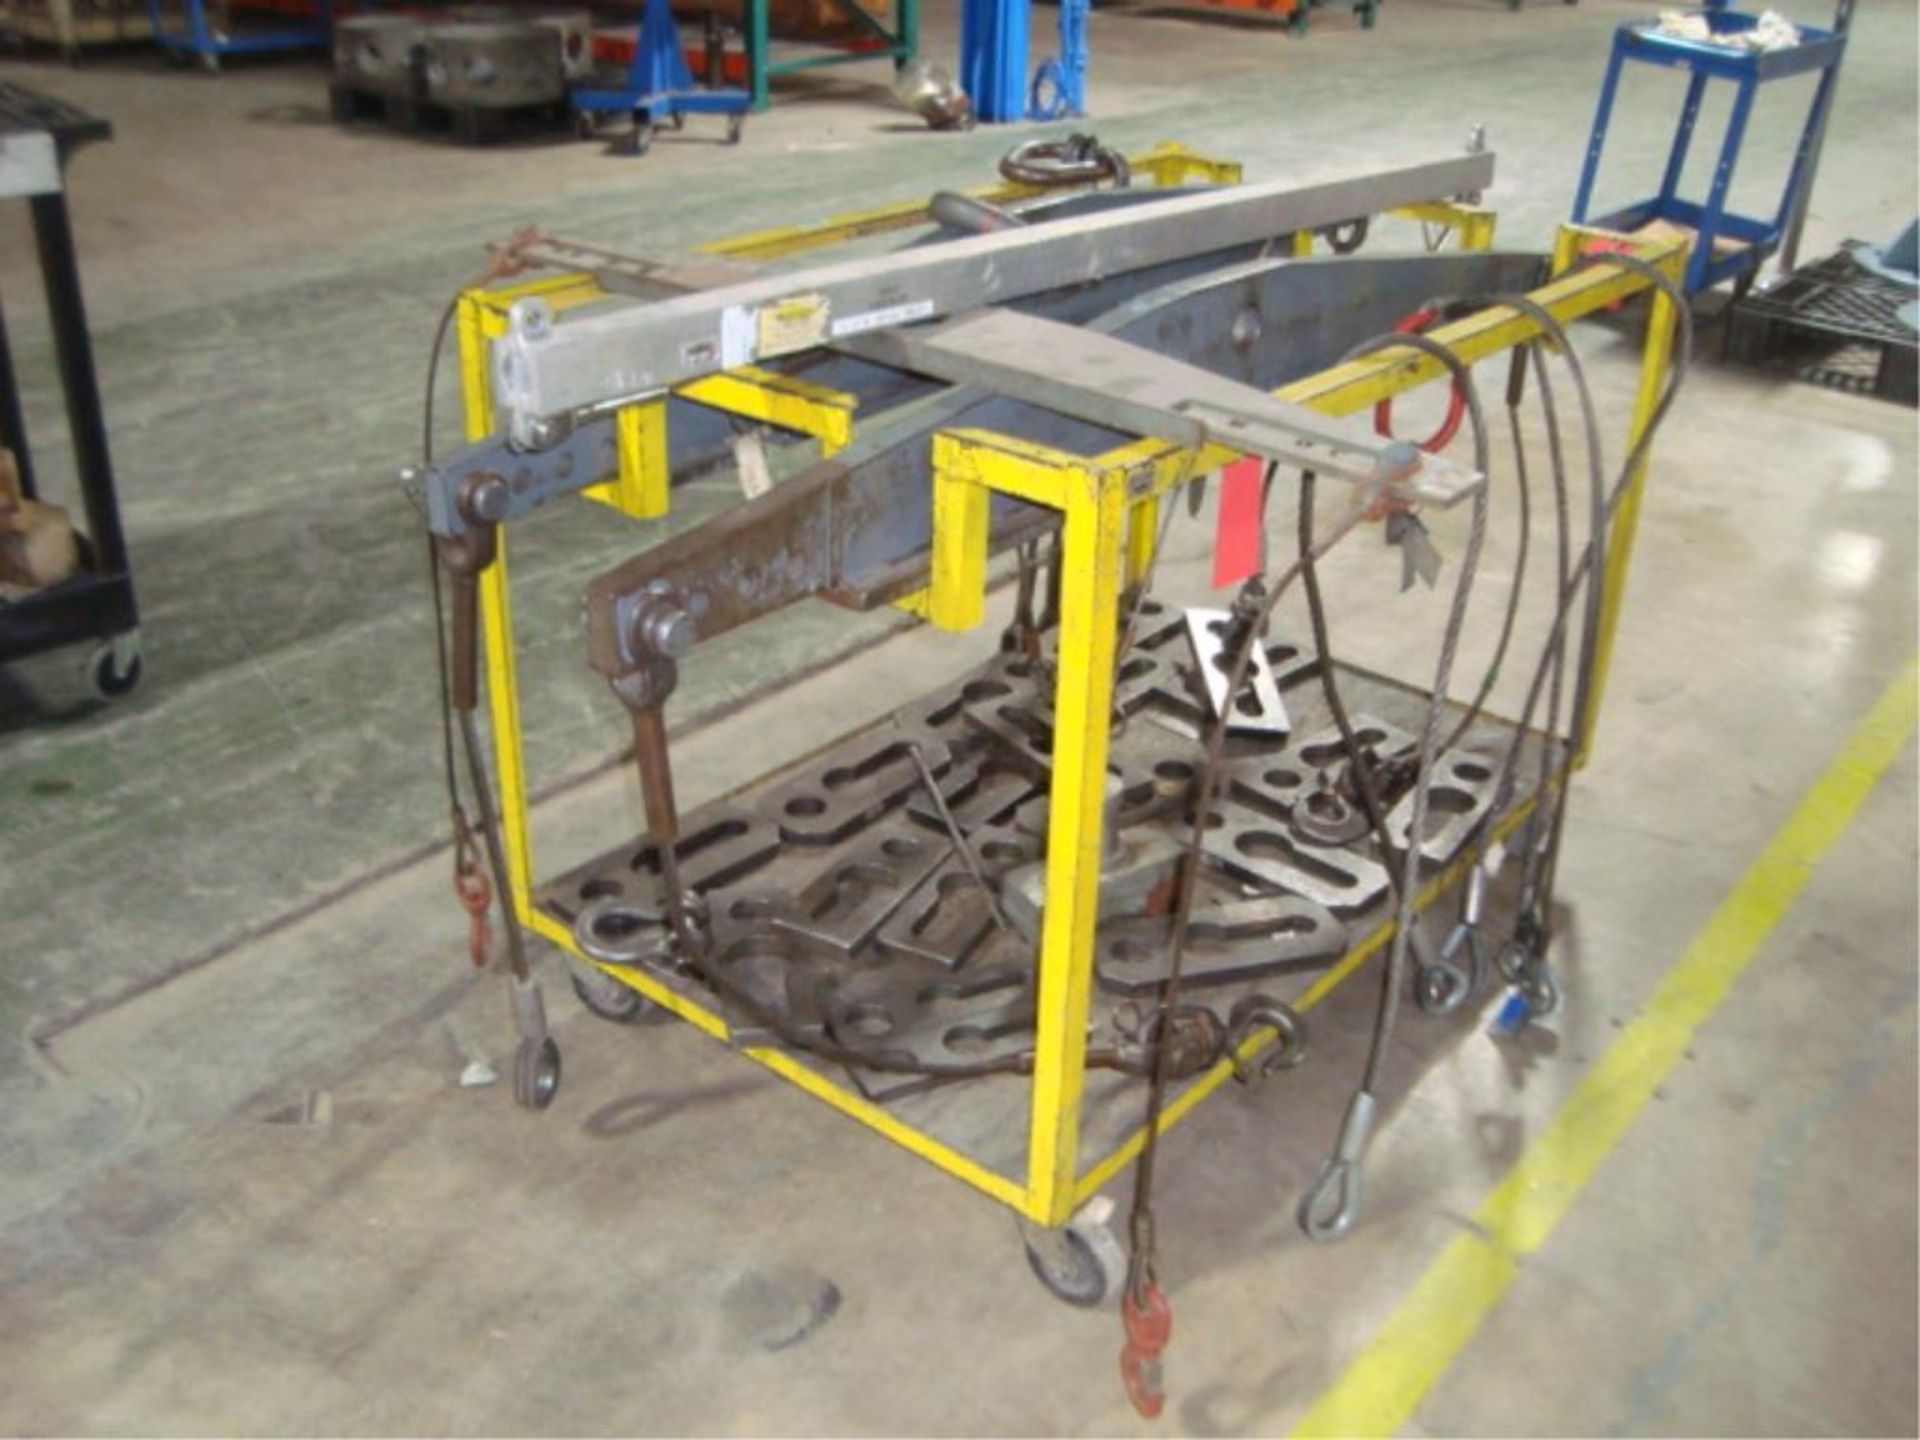 Tool Lift Bars & Mobile Cart With Fixtures - Image 6 of 7